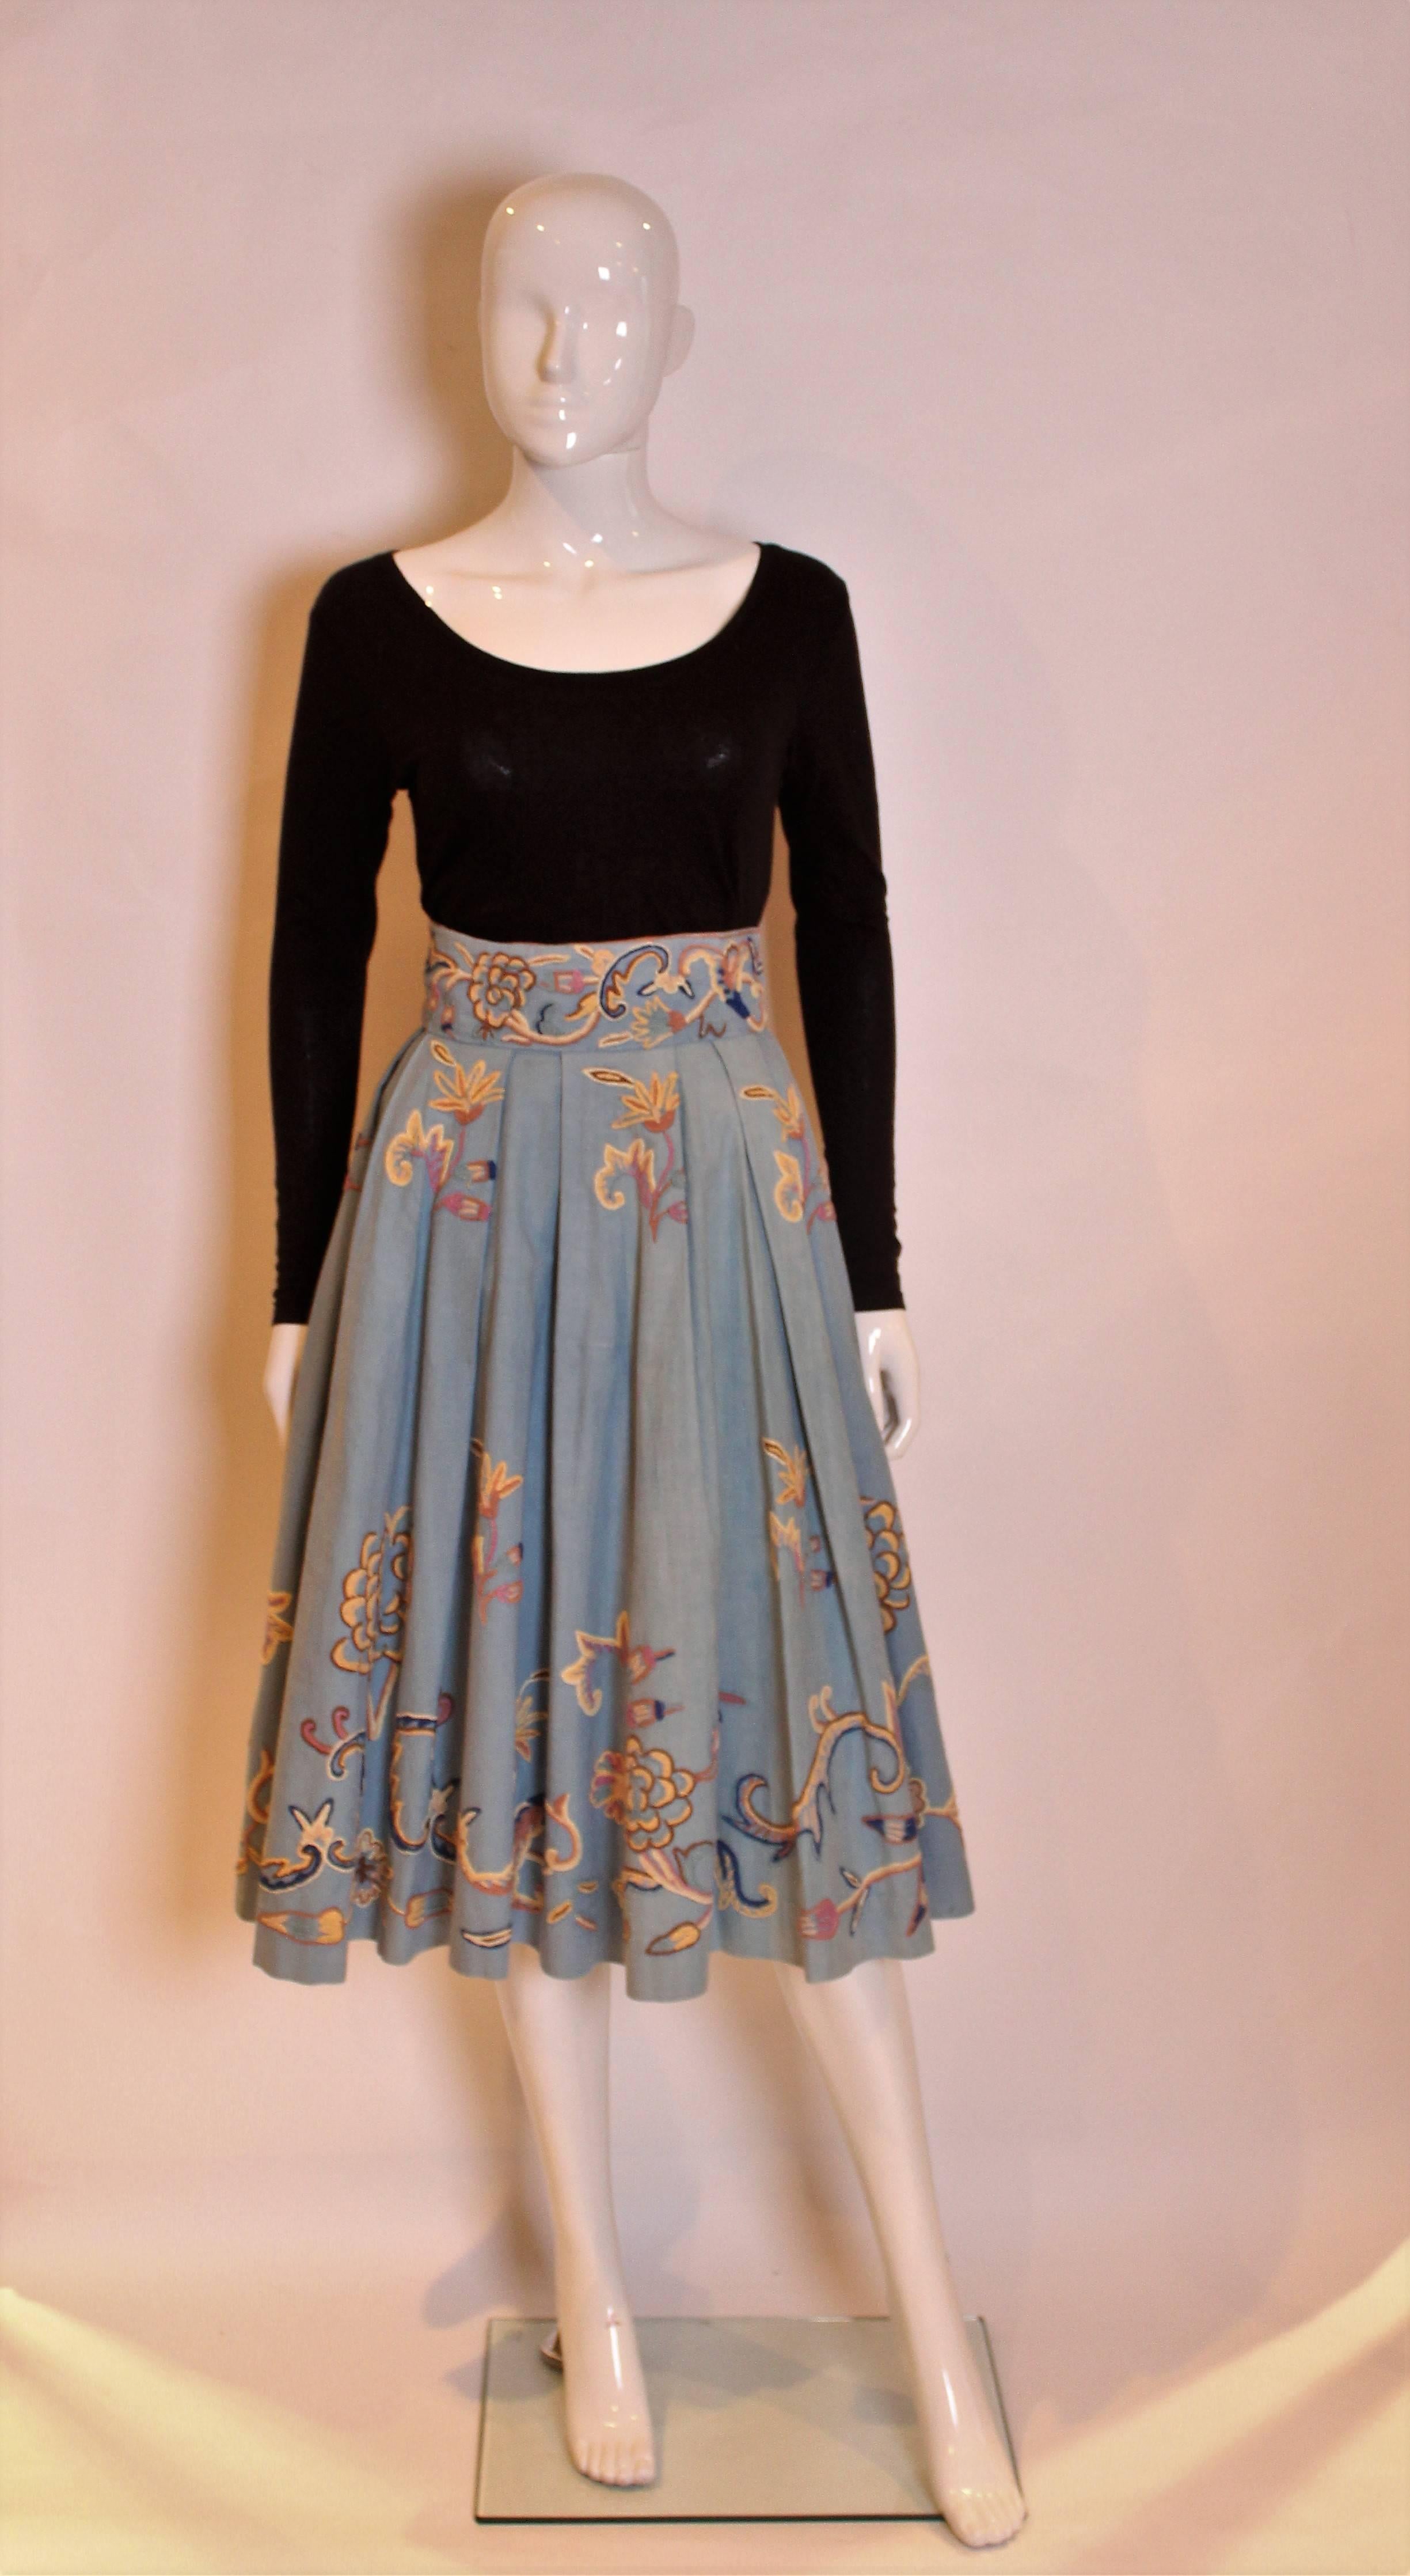 A great skirt for Spring/Summer. In a heavy blue cotton with wonderful embroidery and a great swish when you walk.The skirt has pleats at the waist band and wonderful embroidery in blue, beige, pink and blue.There is a central back zip, and the